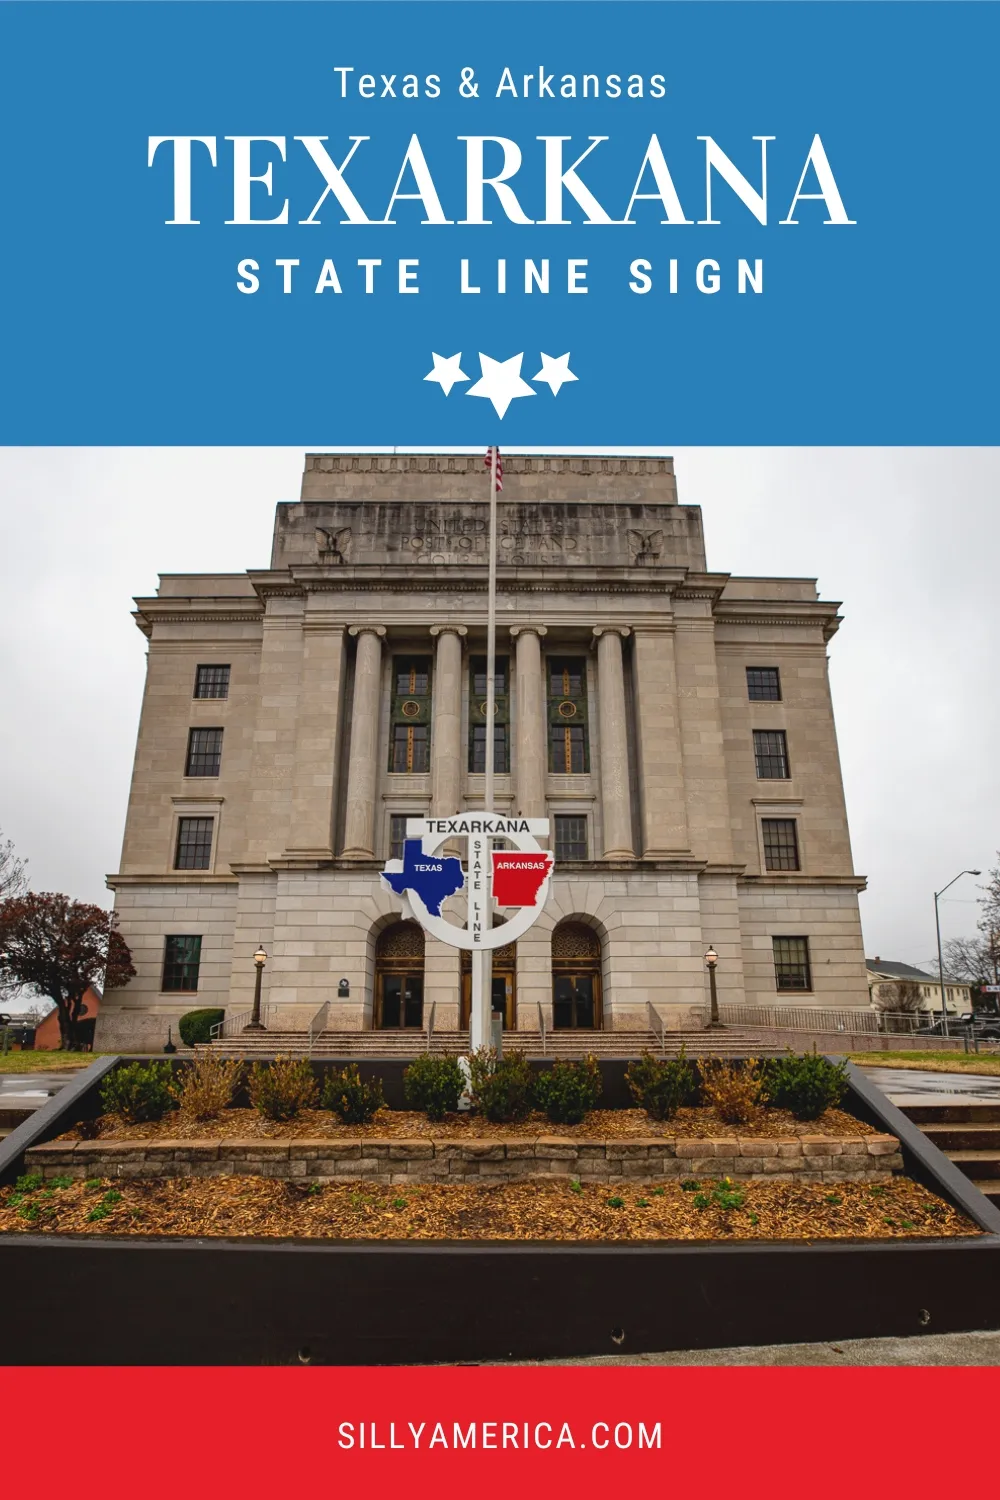 Have you ever wanted to be in two places at once? This unique attraction allows you to do just that. Straddle the line between Texas and Arkansas at the Texarkana State Line Sign! This unique roadside attraction has a fun road trip photo op and the only government building to straddle two states! #Texas #Arkansas #TexasRoadsideAttractions #ArkansasRoadsideAttractions #TexasRoadTrip #ArkansasRoadTrip #RoadTrip #RoadsideAttraction